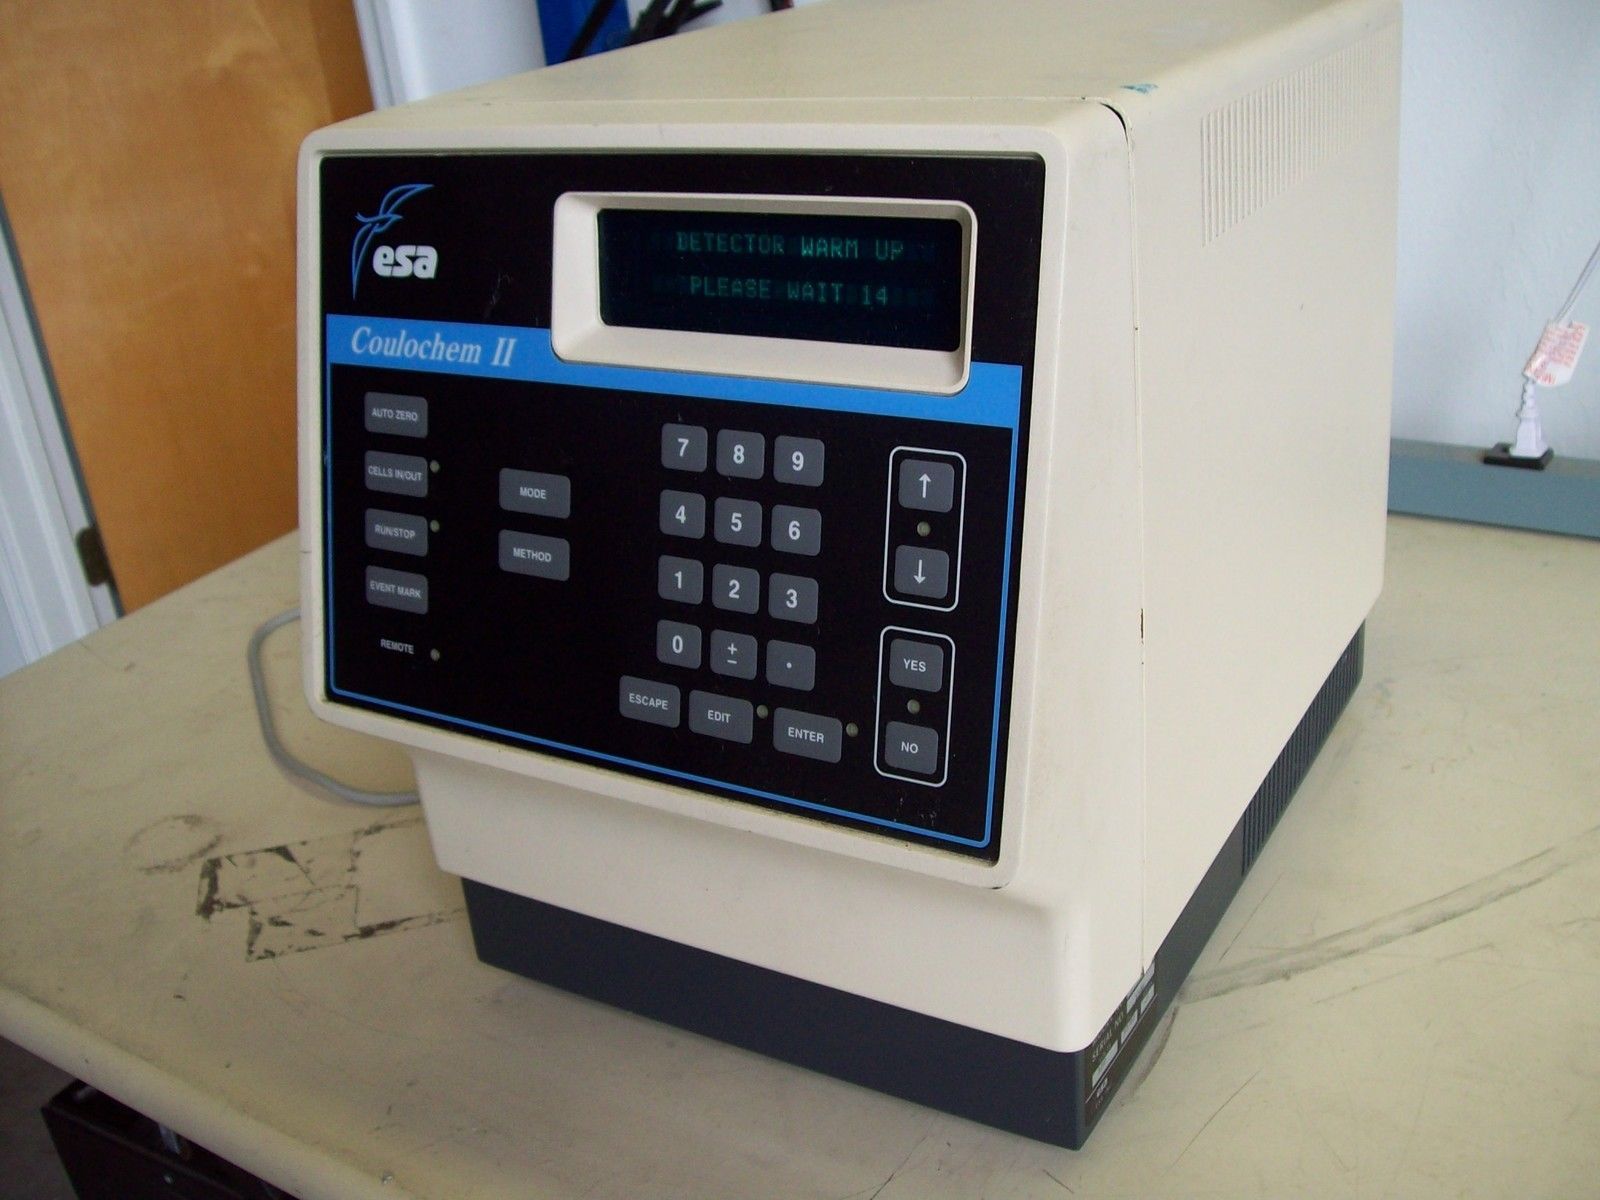 ESA Coulochem II Detector Model 5200A  GREAT CONDITION SALE SALE  $159 - $157.40